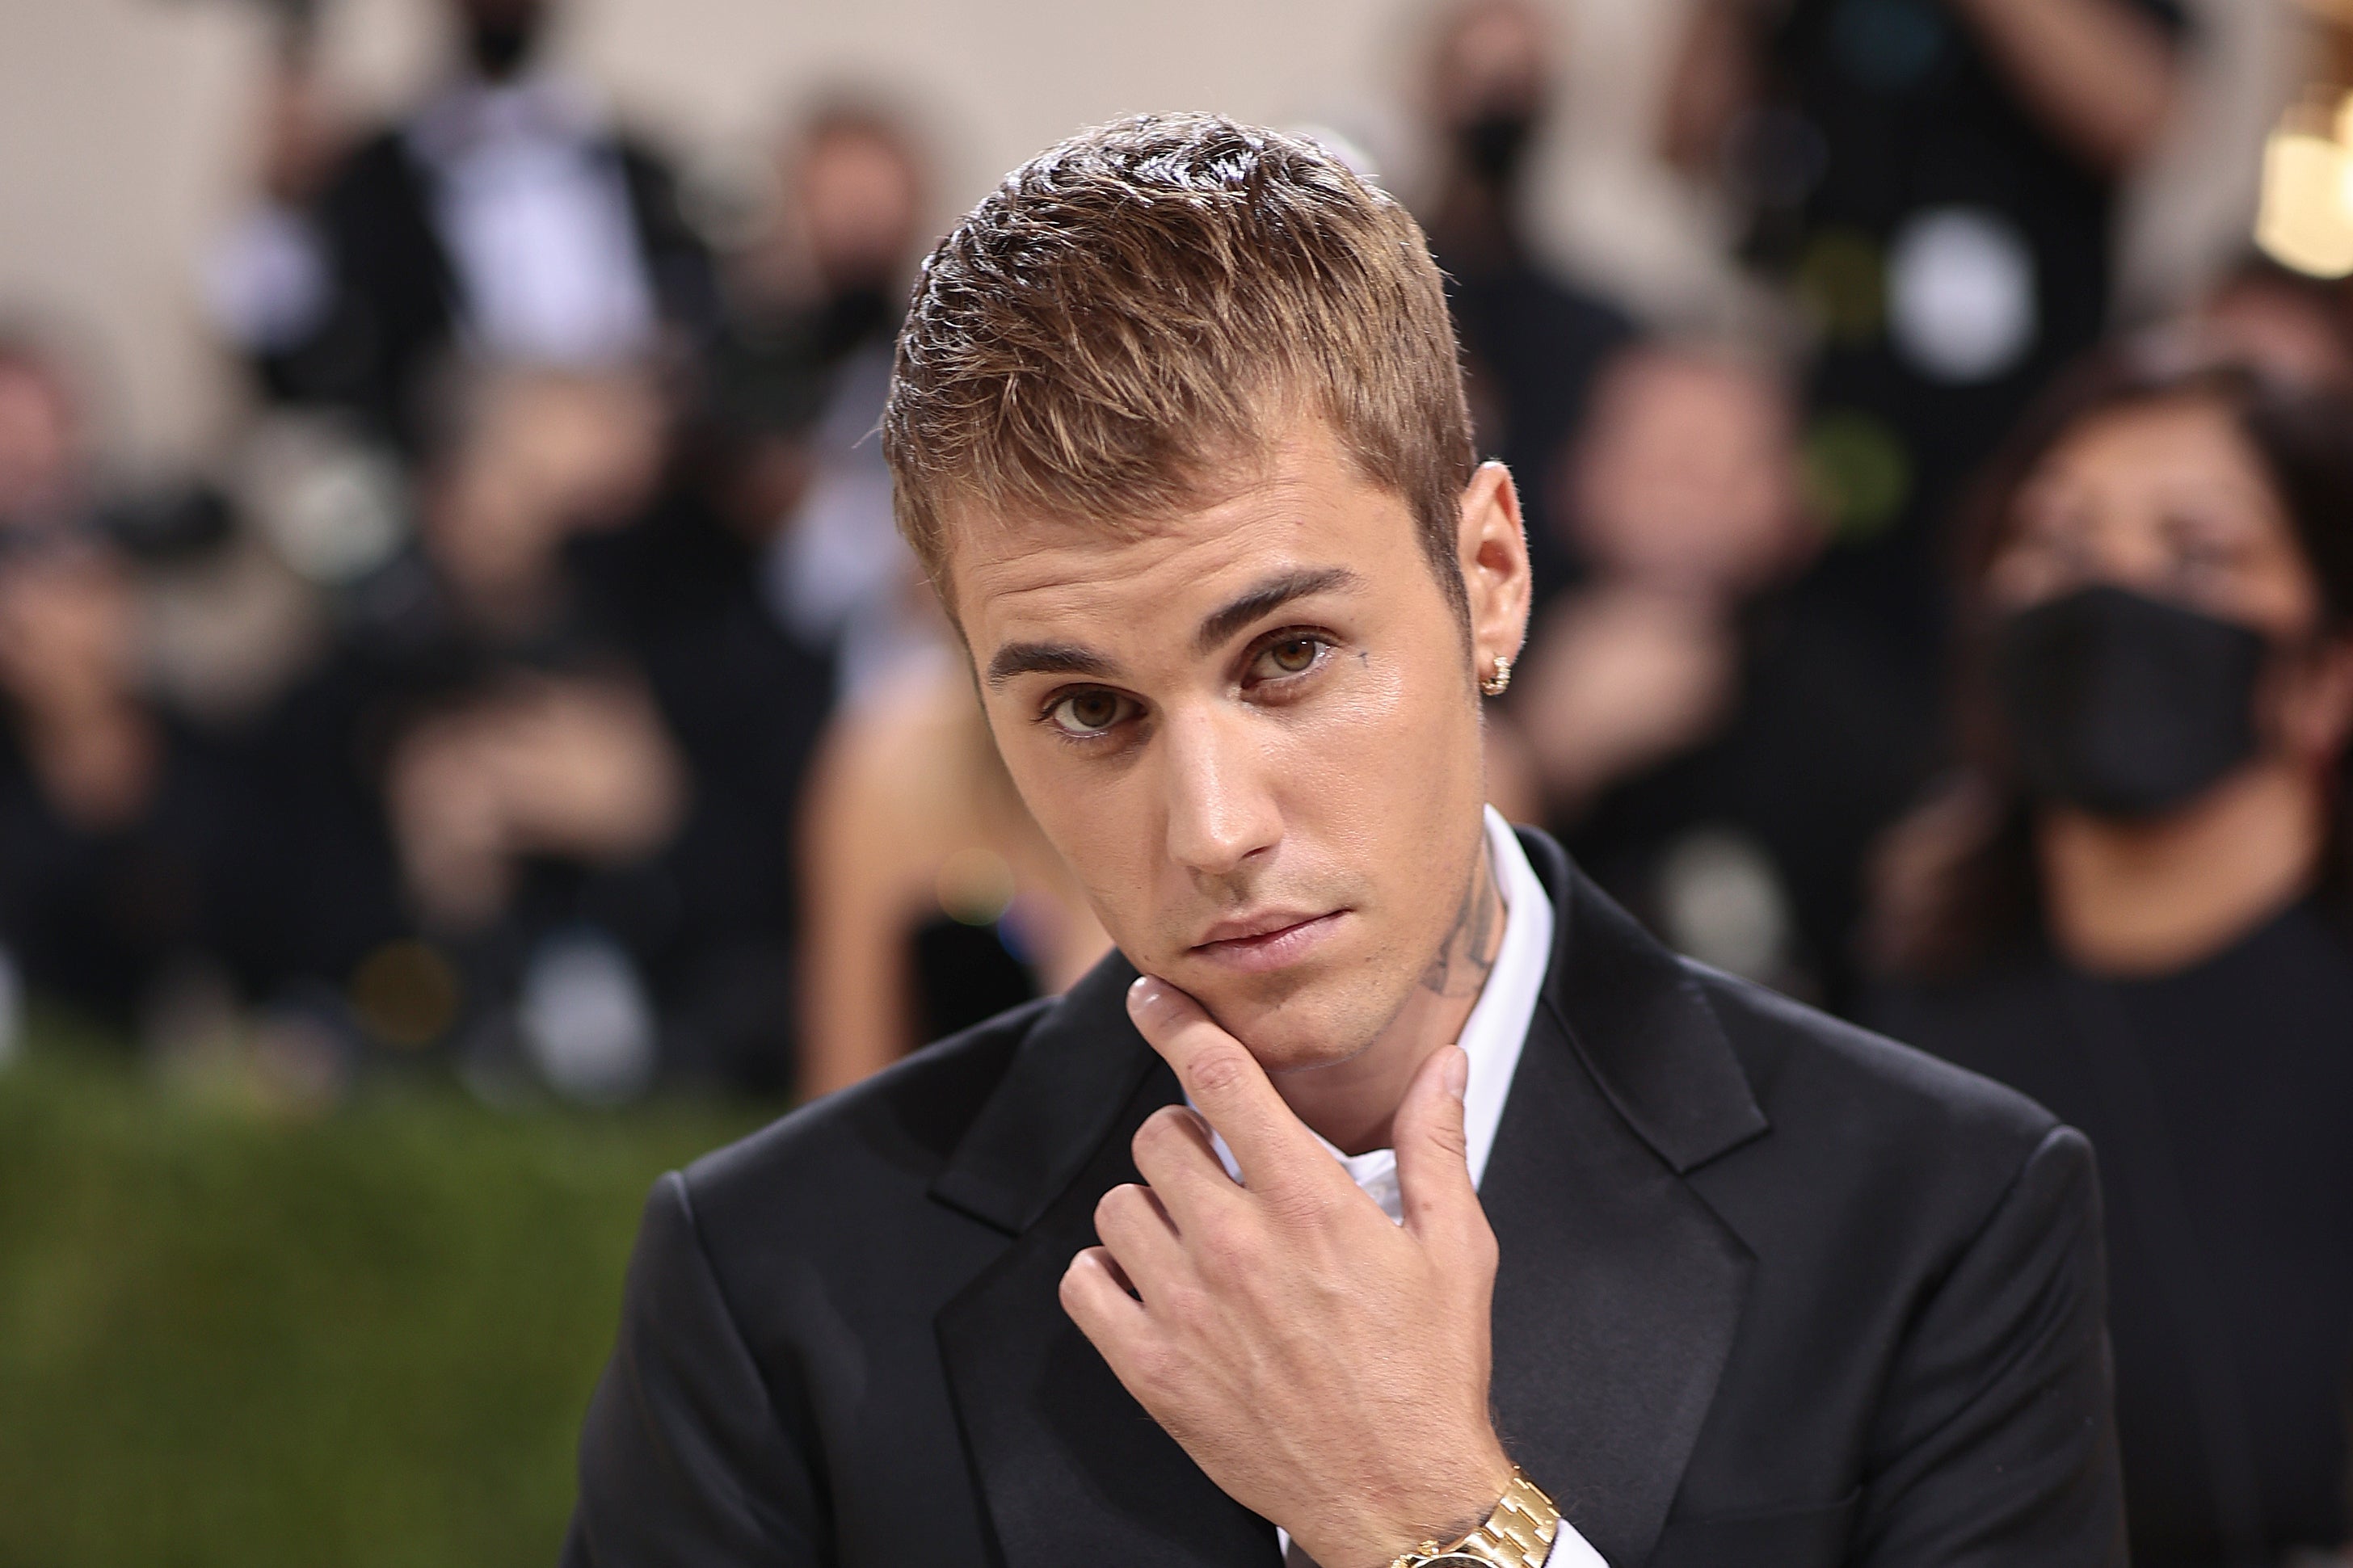 Justin Bieber Is Reportedly "Facing Some Difficulties" After Posting Crying Selfies On Instagram